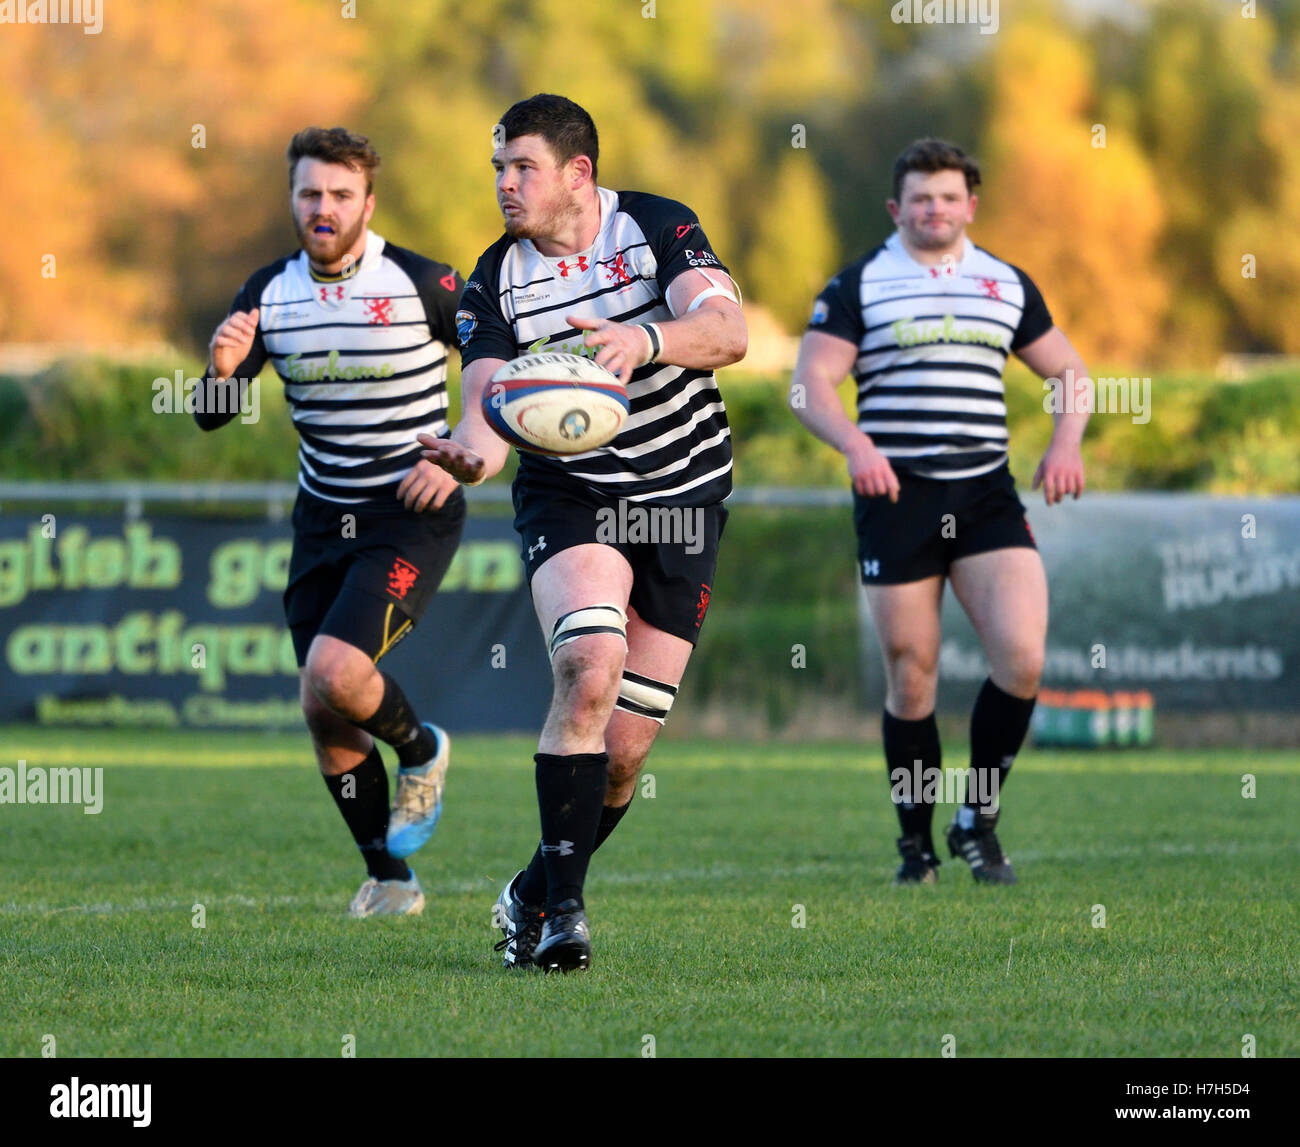 Manchester  UK 5th November 2016  Action from the South Lancashire/Cheshire Division 1 match between Broughton Park, in black, and Oswestrys, in red. Broughton Park win 62-0, after leading 22-0 at half-time to move into second place and keep Oswestry in bottom place. Stock Photo